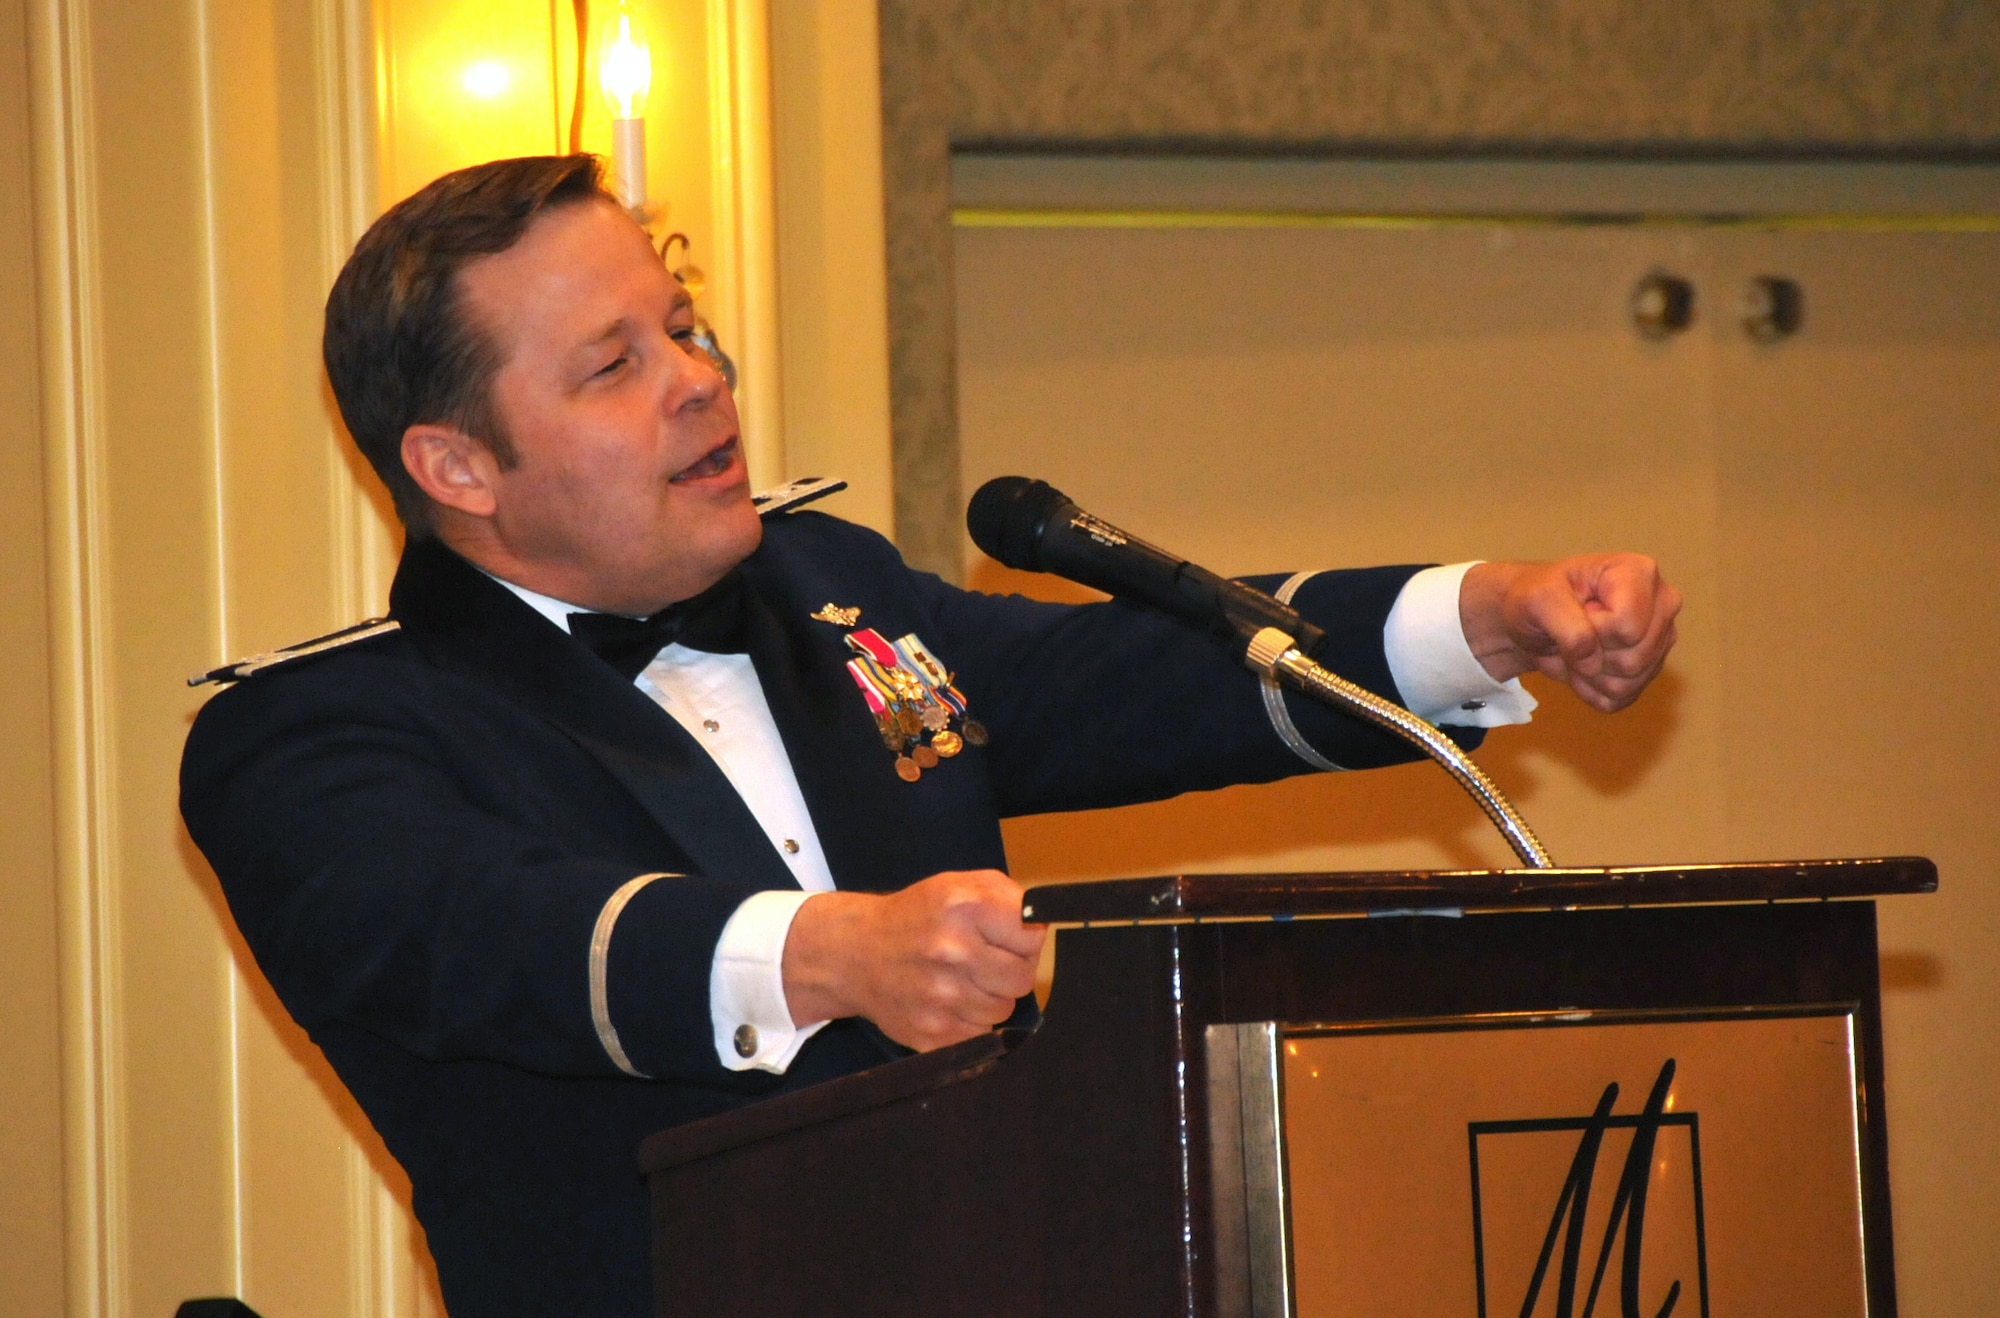 Colonel (Dr.) Brett A. Wyrick, USAF lightens the mood at the 185th Air Refueling Wing Military Ball on April 14, 2012 at the Marina Inn in South Sioux City, Neb. Col. Wyrick serves as the Air Surgeon, National Guard Bureau, Washington, D.C. and as the Director of the Medical Service on the staff of the Director of the Air National Guard. (Air Force Photo by TSgt Brian Cox. Released)